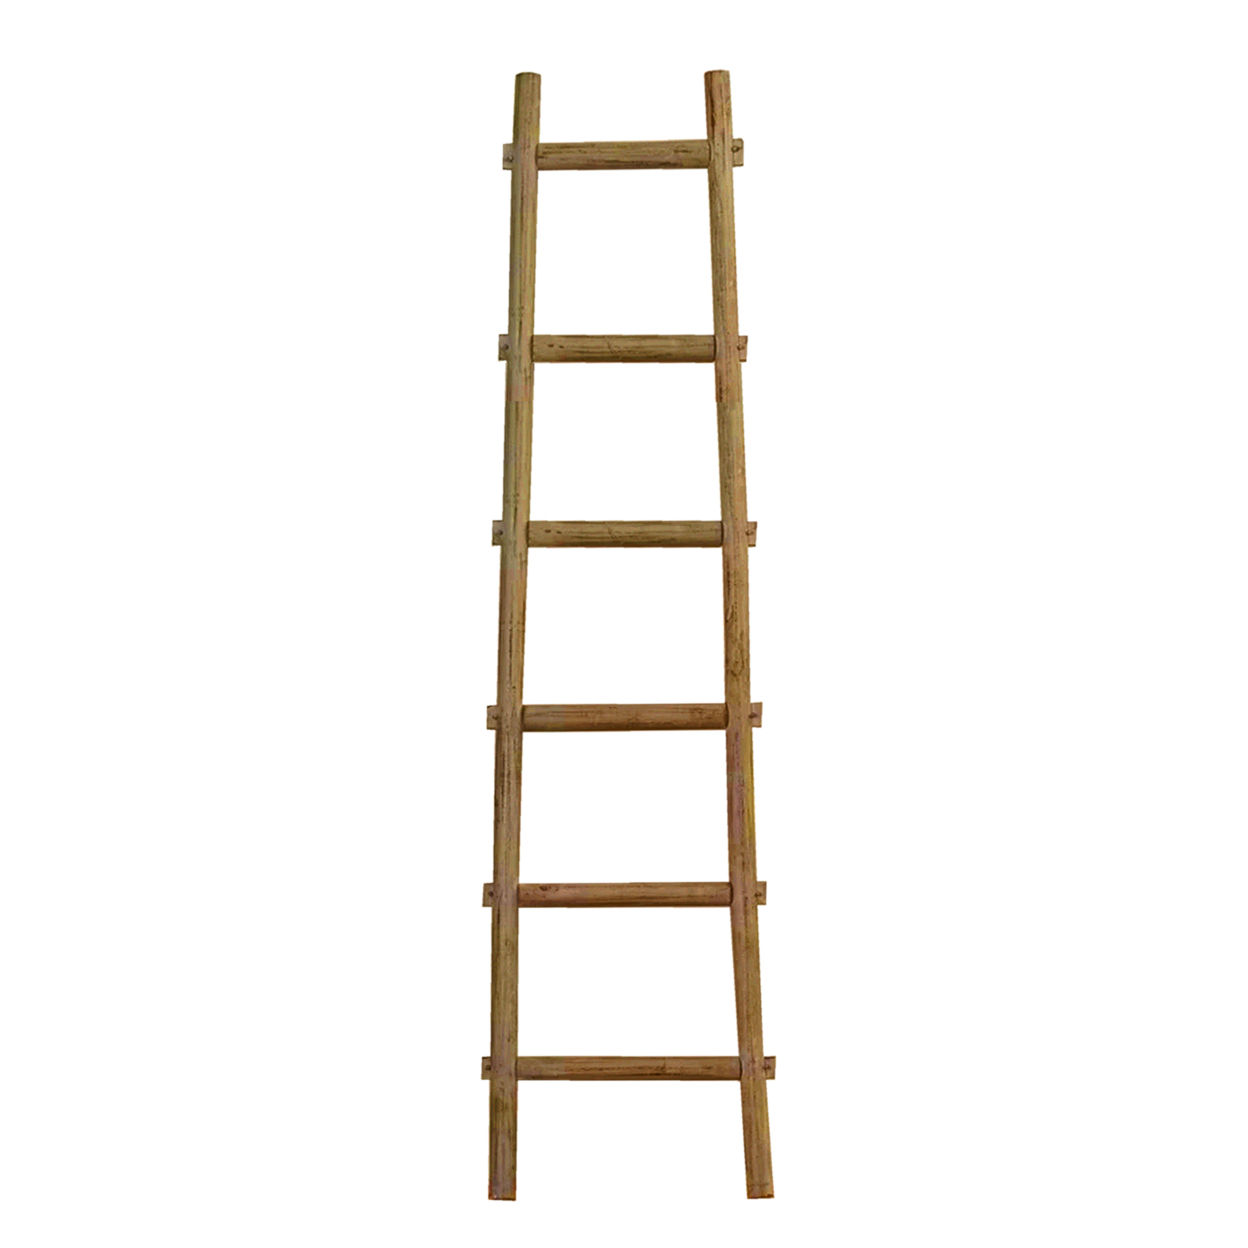 Transitional Style Wooden Decor Ladder With 6 Steps, Brown- Saltoro Sherpi